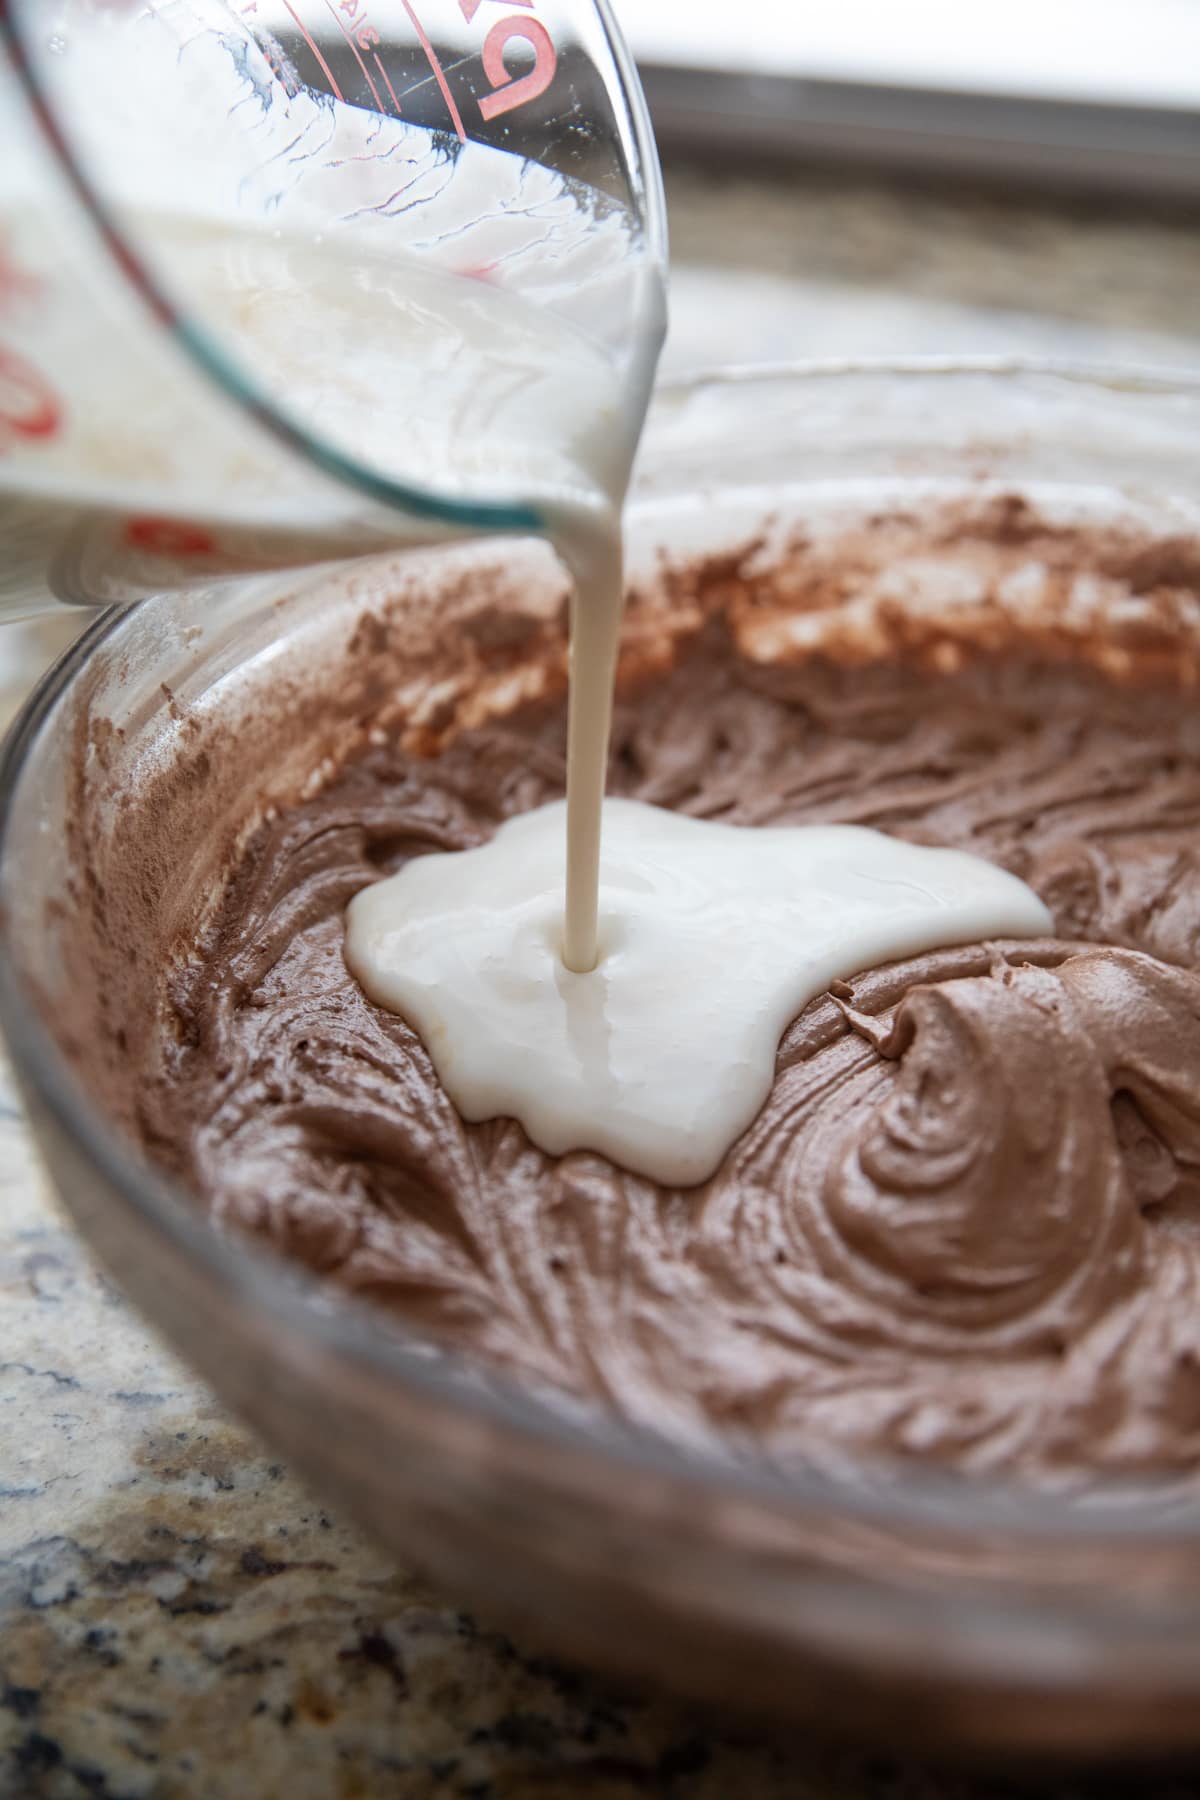 pouring in buttermilk into chocolate cake batter